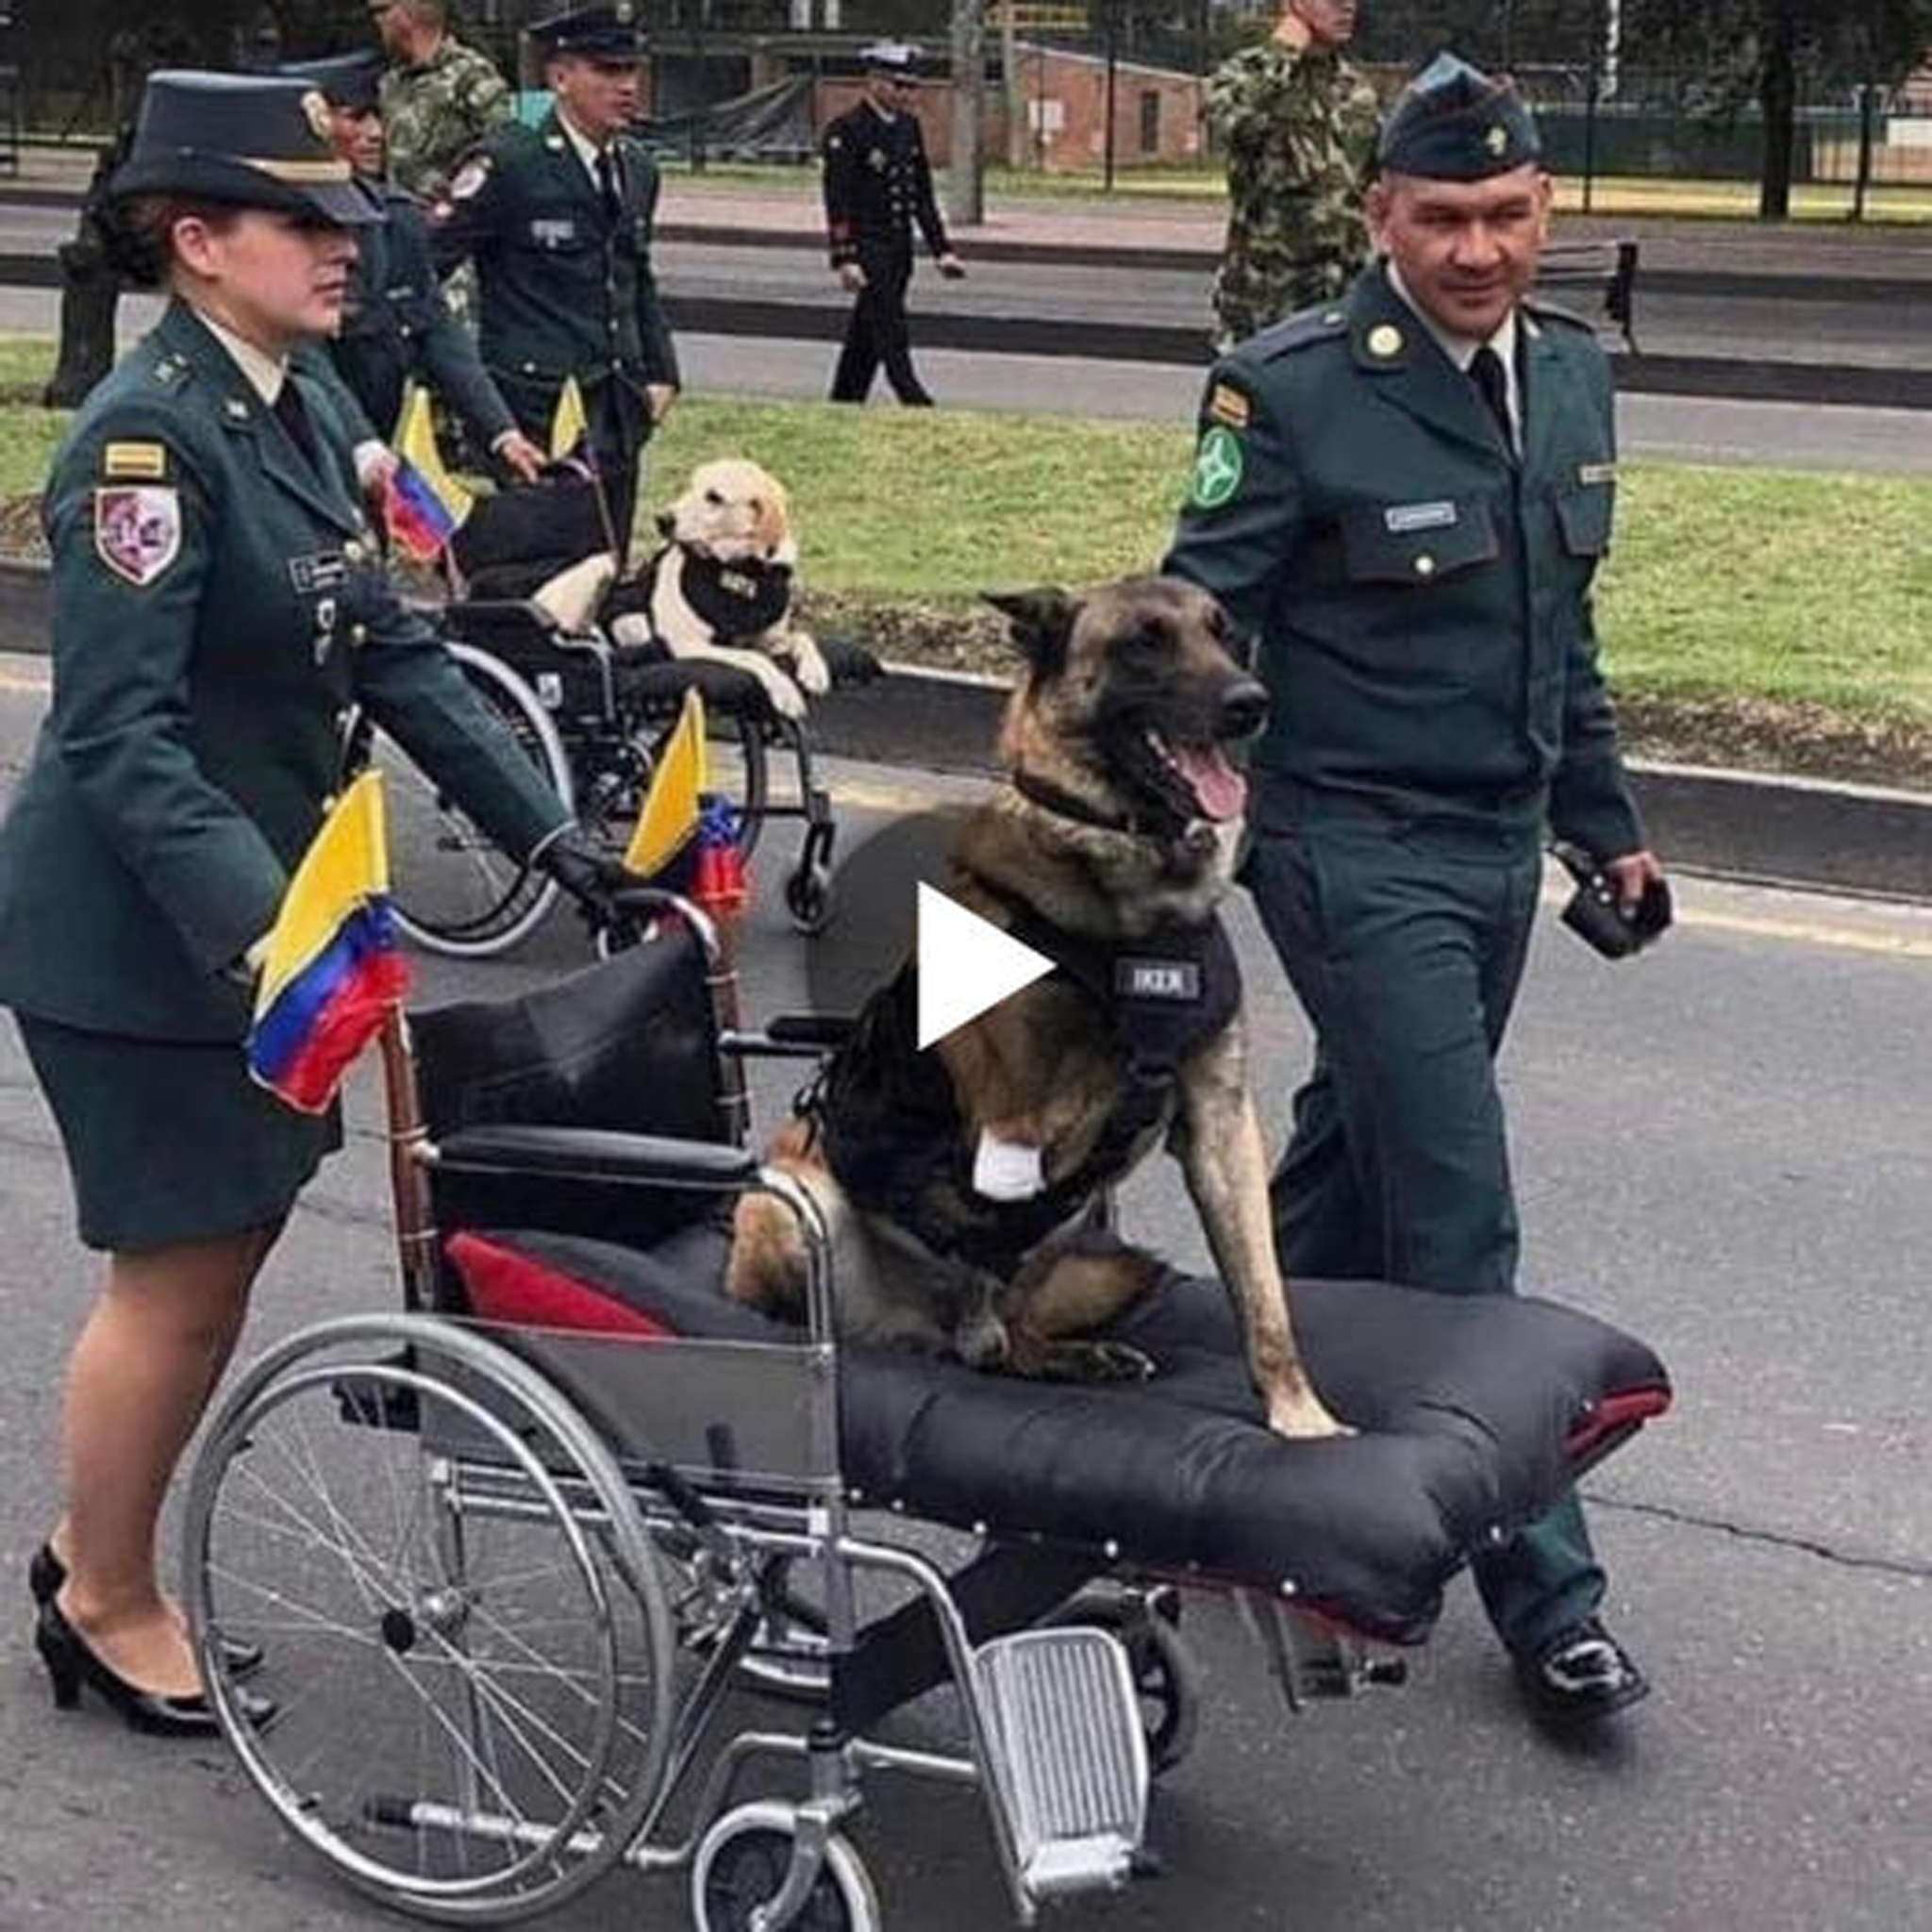 A touching scene depicts the triumph of a war veteran dog who is returning home in a wheelchair after serving seven years on the battlefield.